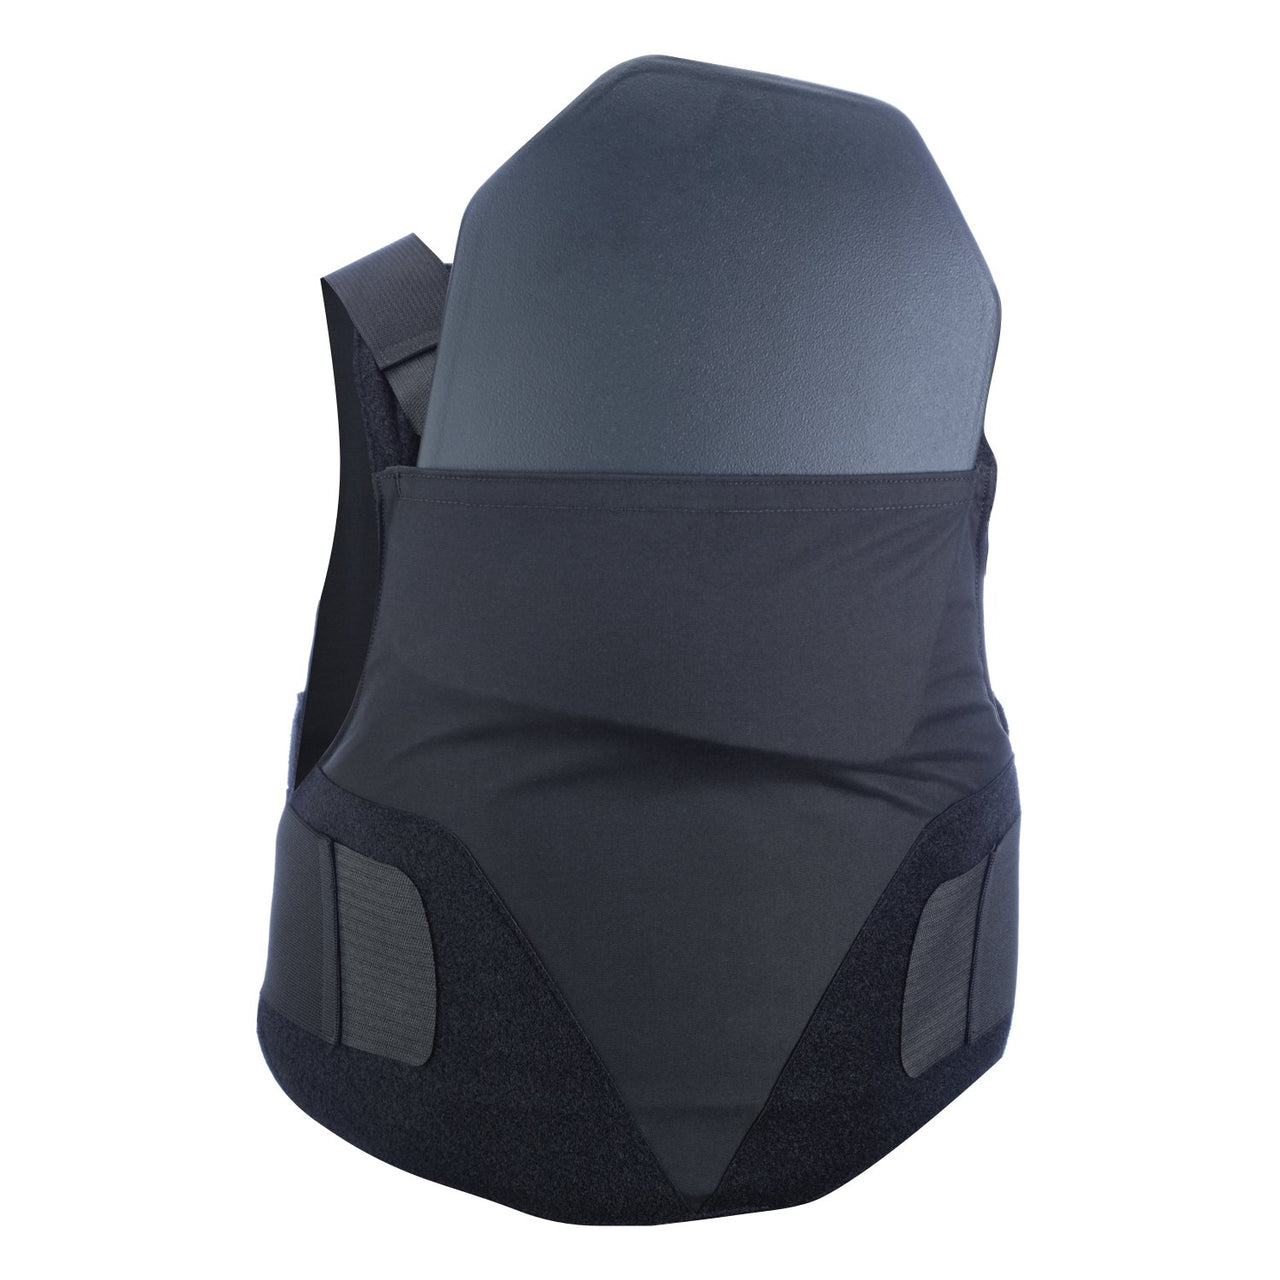 A Body Armor Direct All American Concealable Enhanced Multi-Threat Vest with a back protector on it.